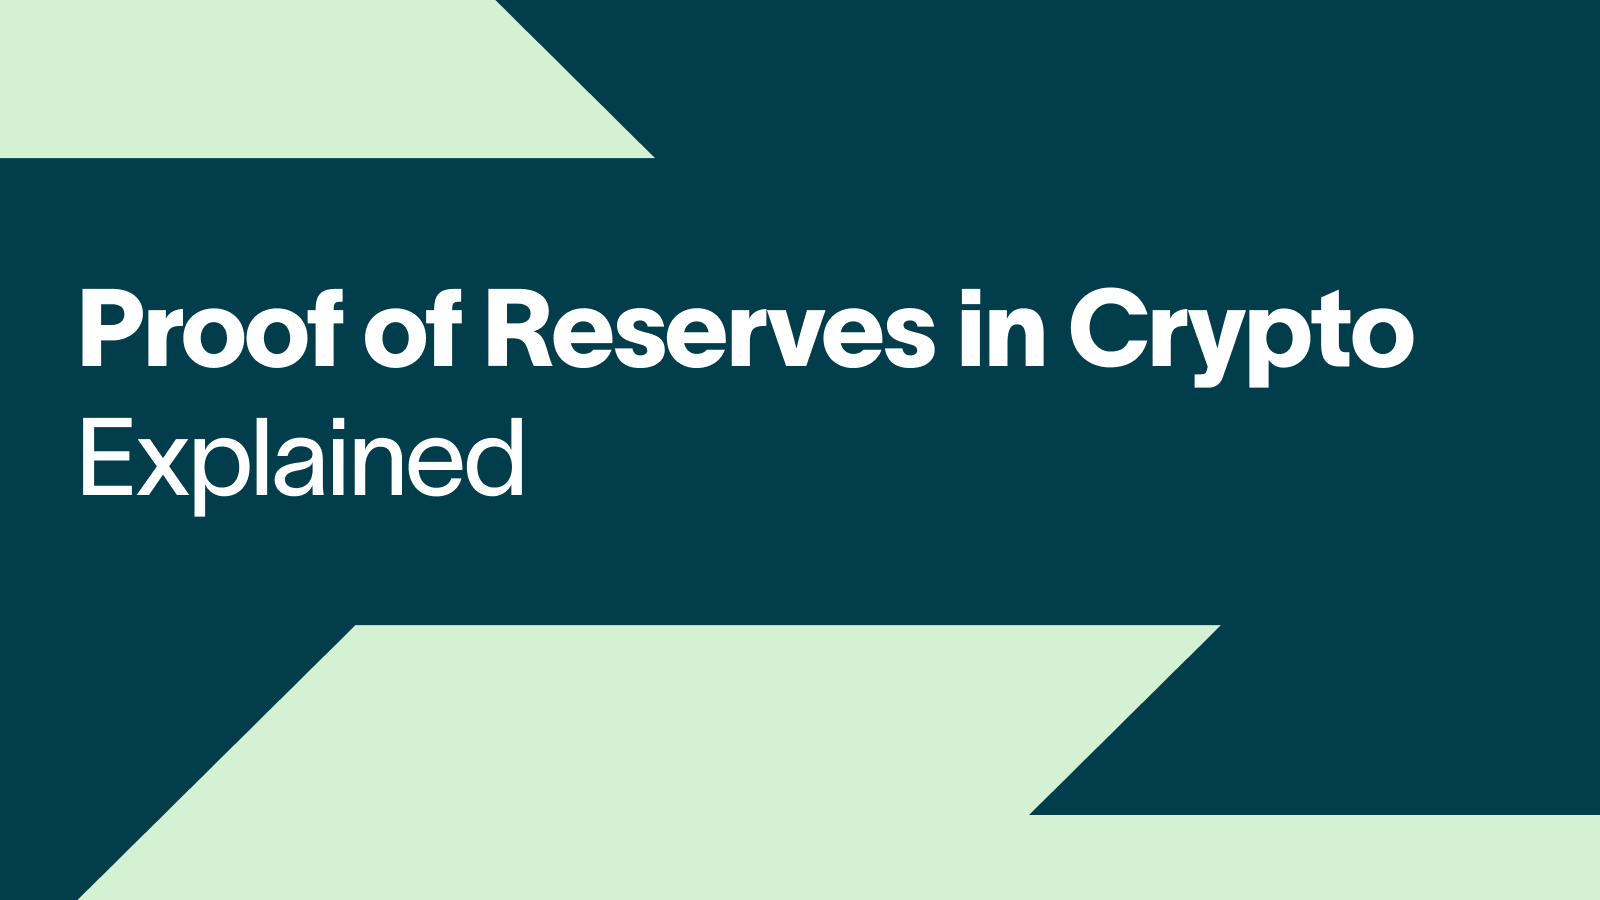 Proof of Reserves in Crypto Explained (1)